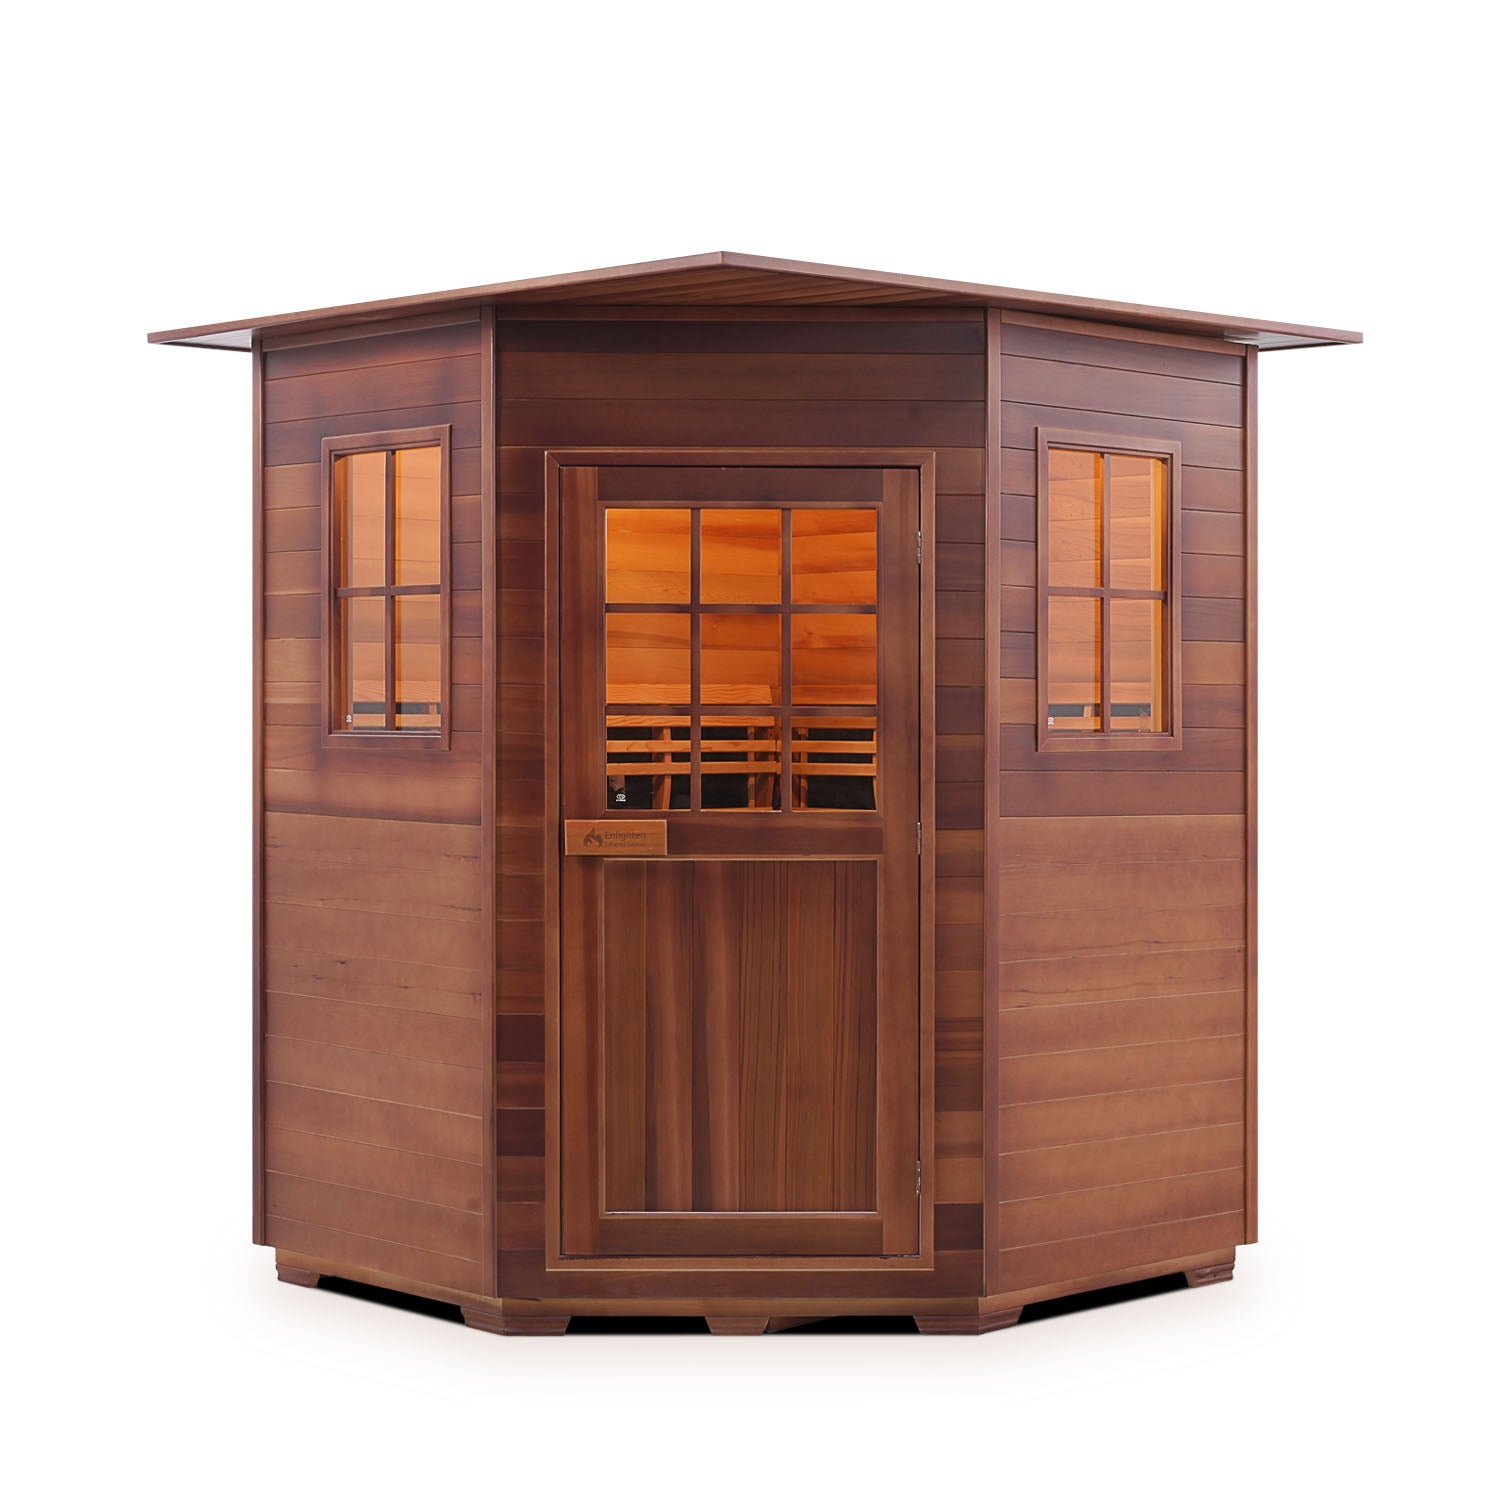 Enlighten Sauna InfraNature Original Infrared Canadian Red Cedar Wood Outside And Inside with indoor Roofed four person sauna front view